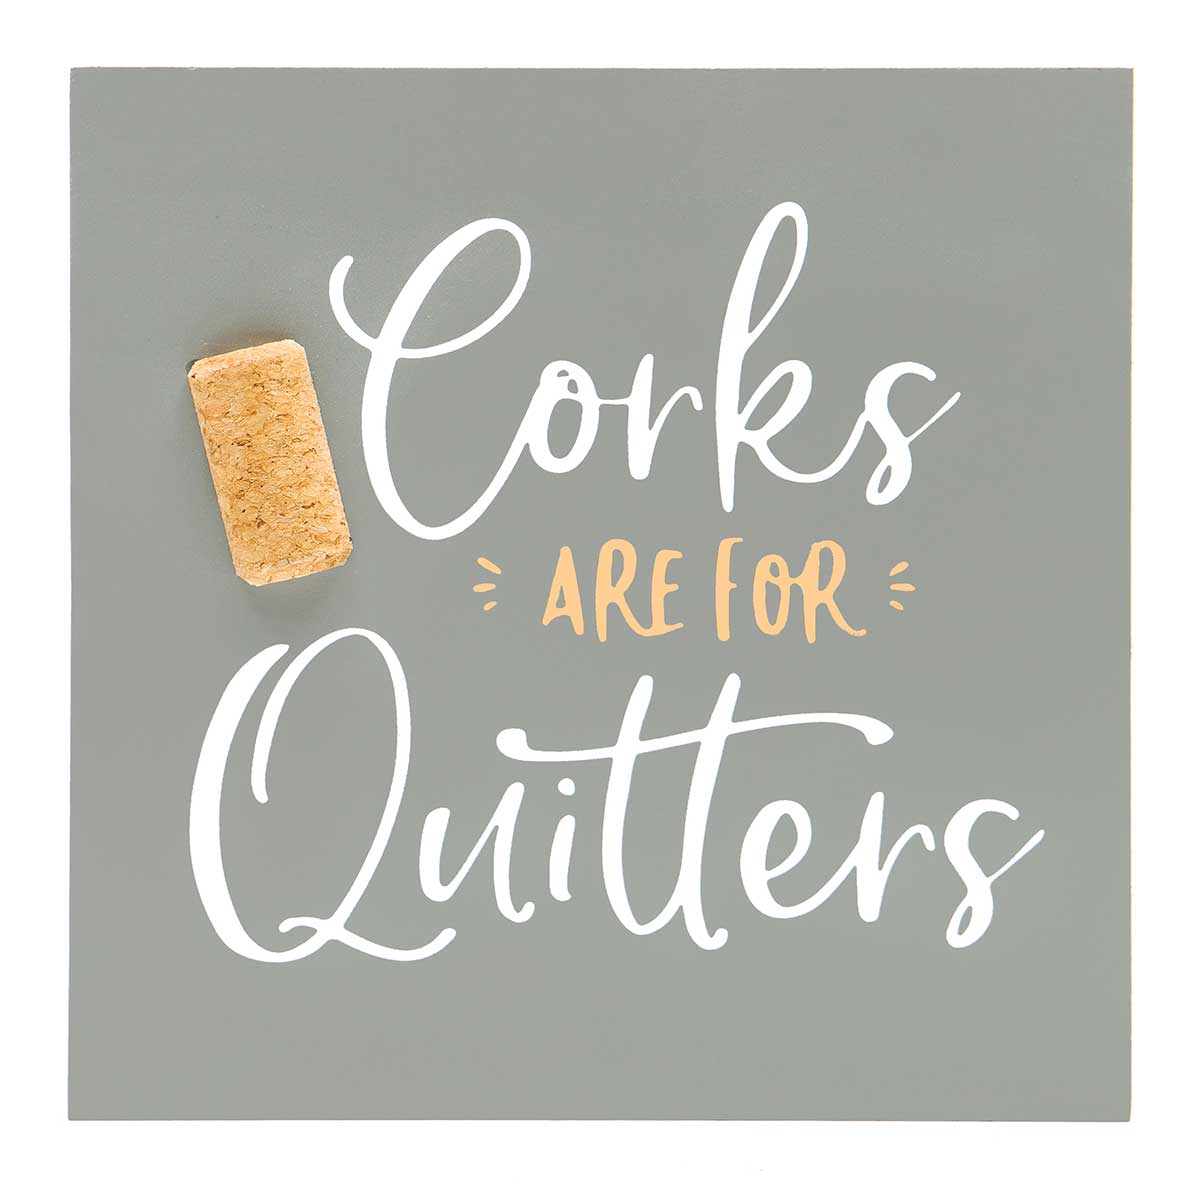 !Corks are for Quitters Wood Sign with Cork